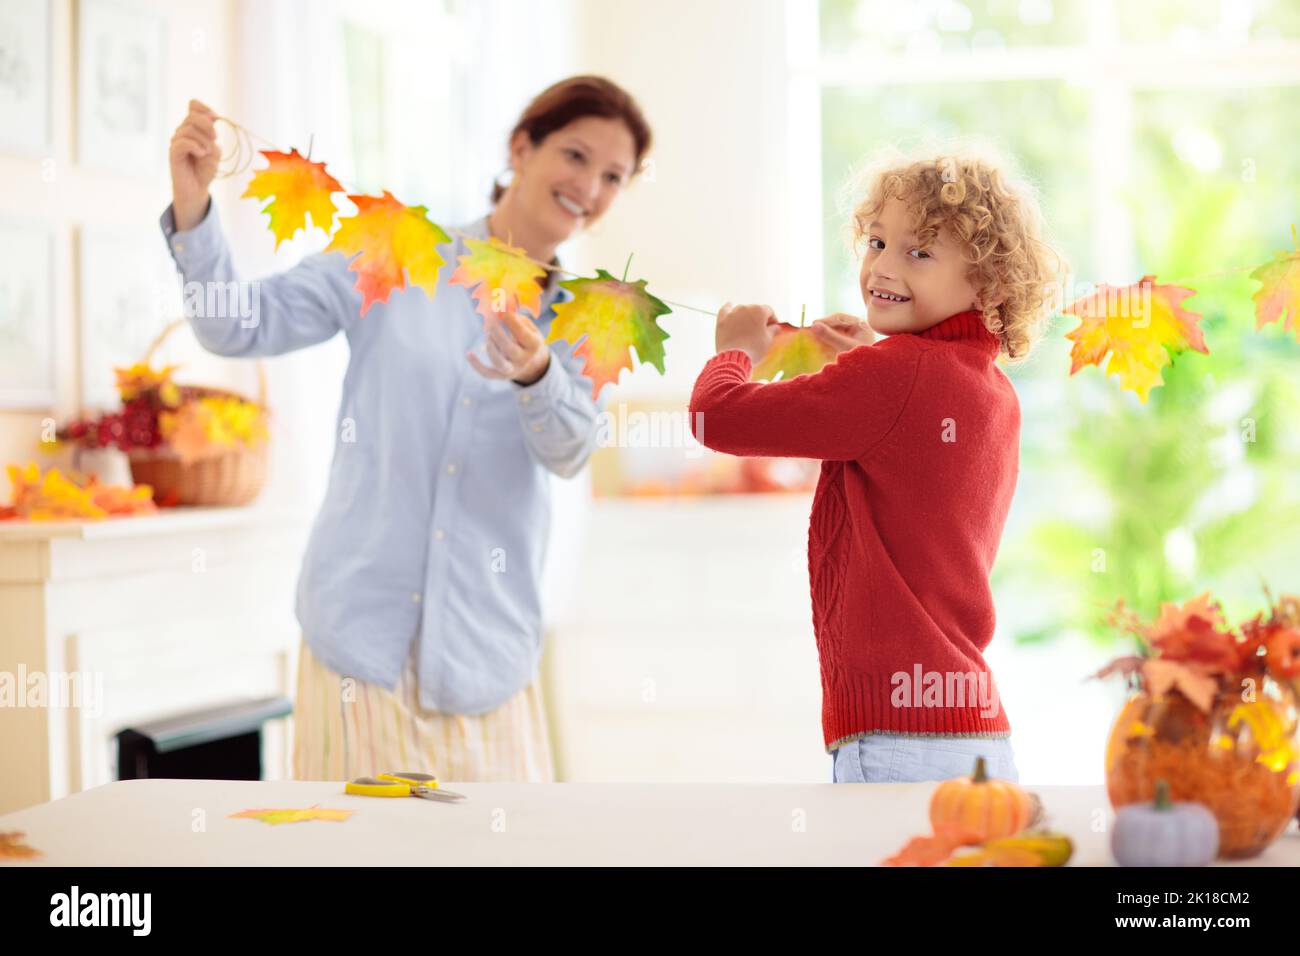 Autumn home decoration. Family decorating house with colorful maple leaves banner. Thanksgiving or Halloween celebration in white living room. Child w Stock Photo